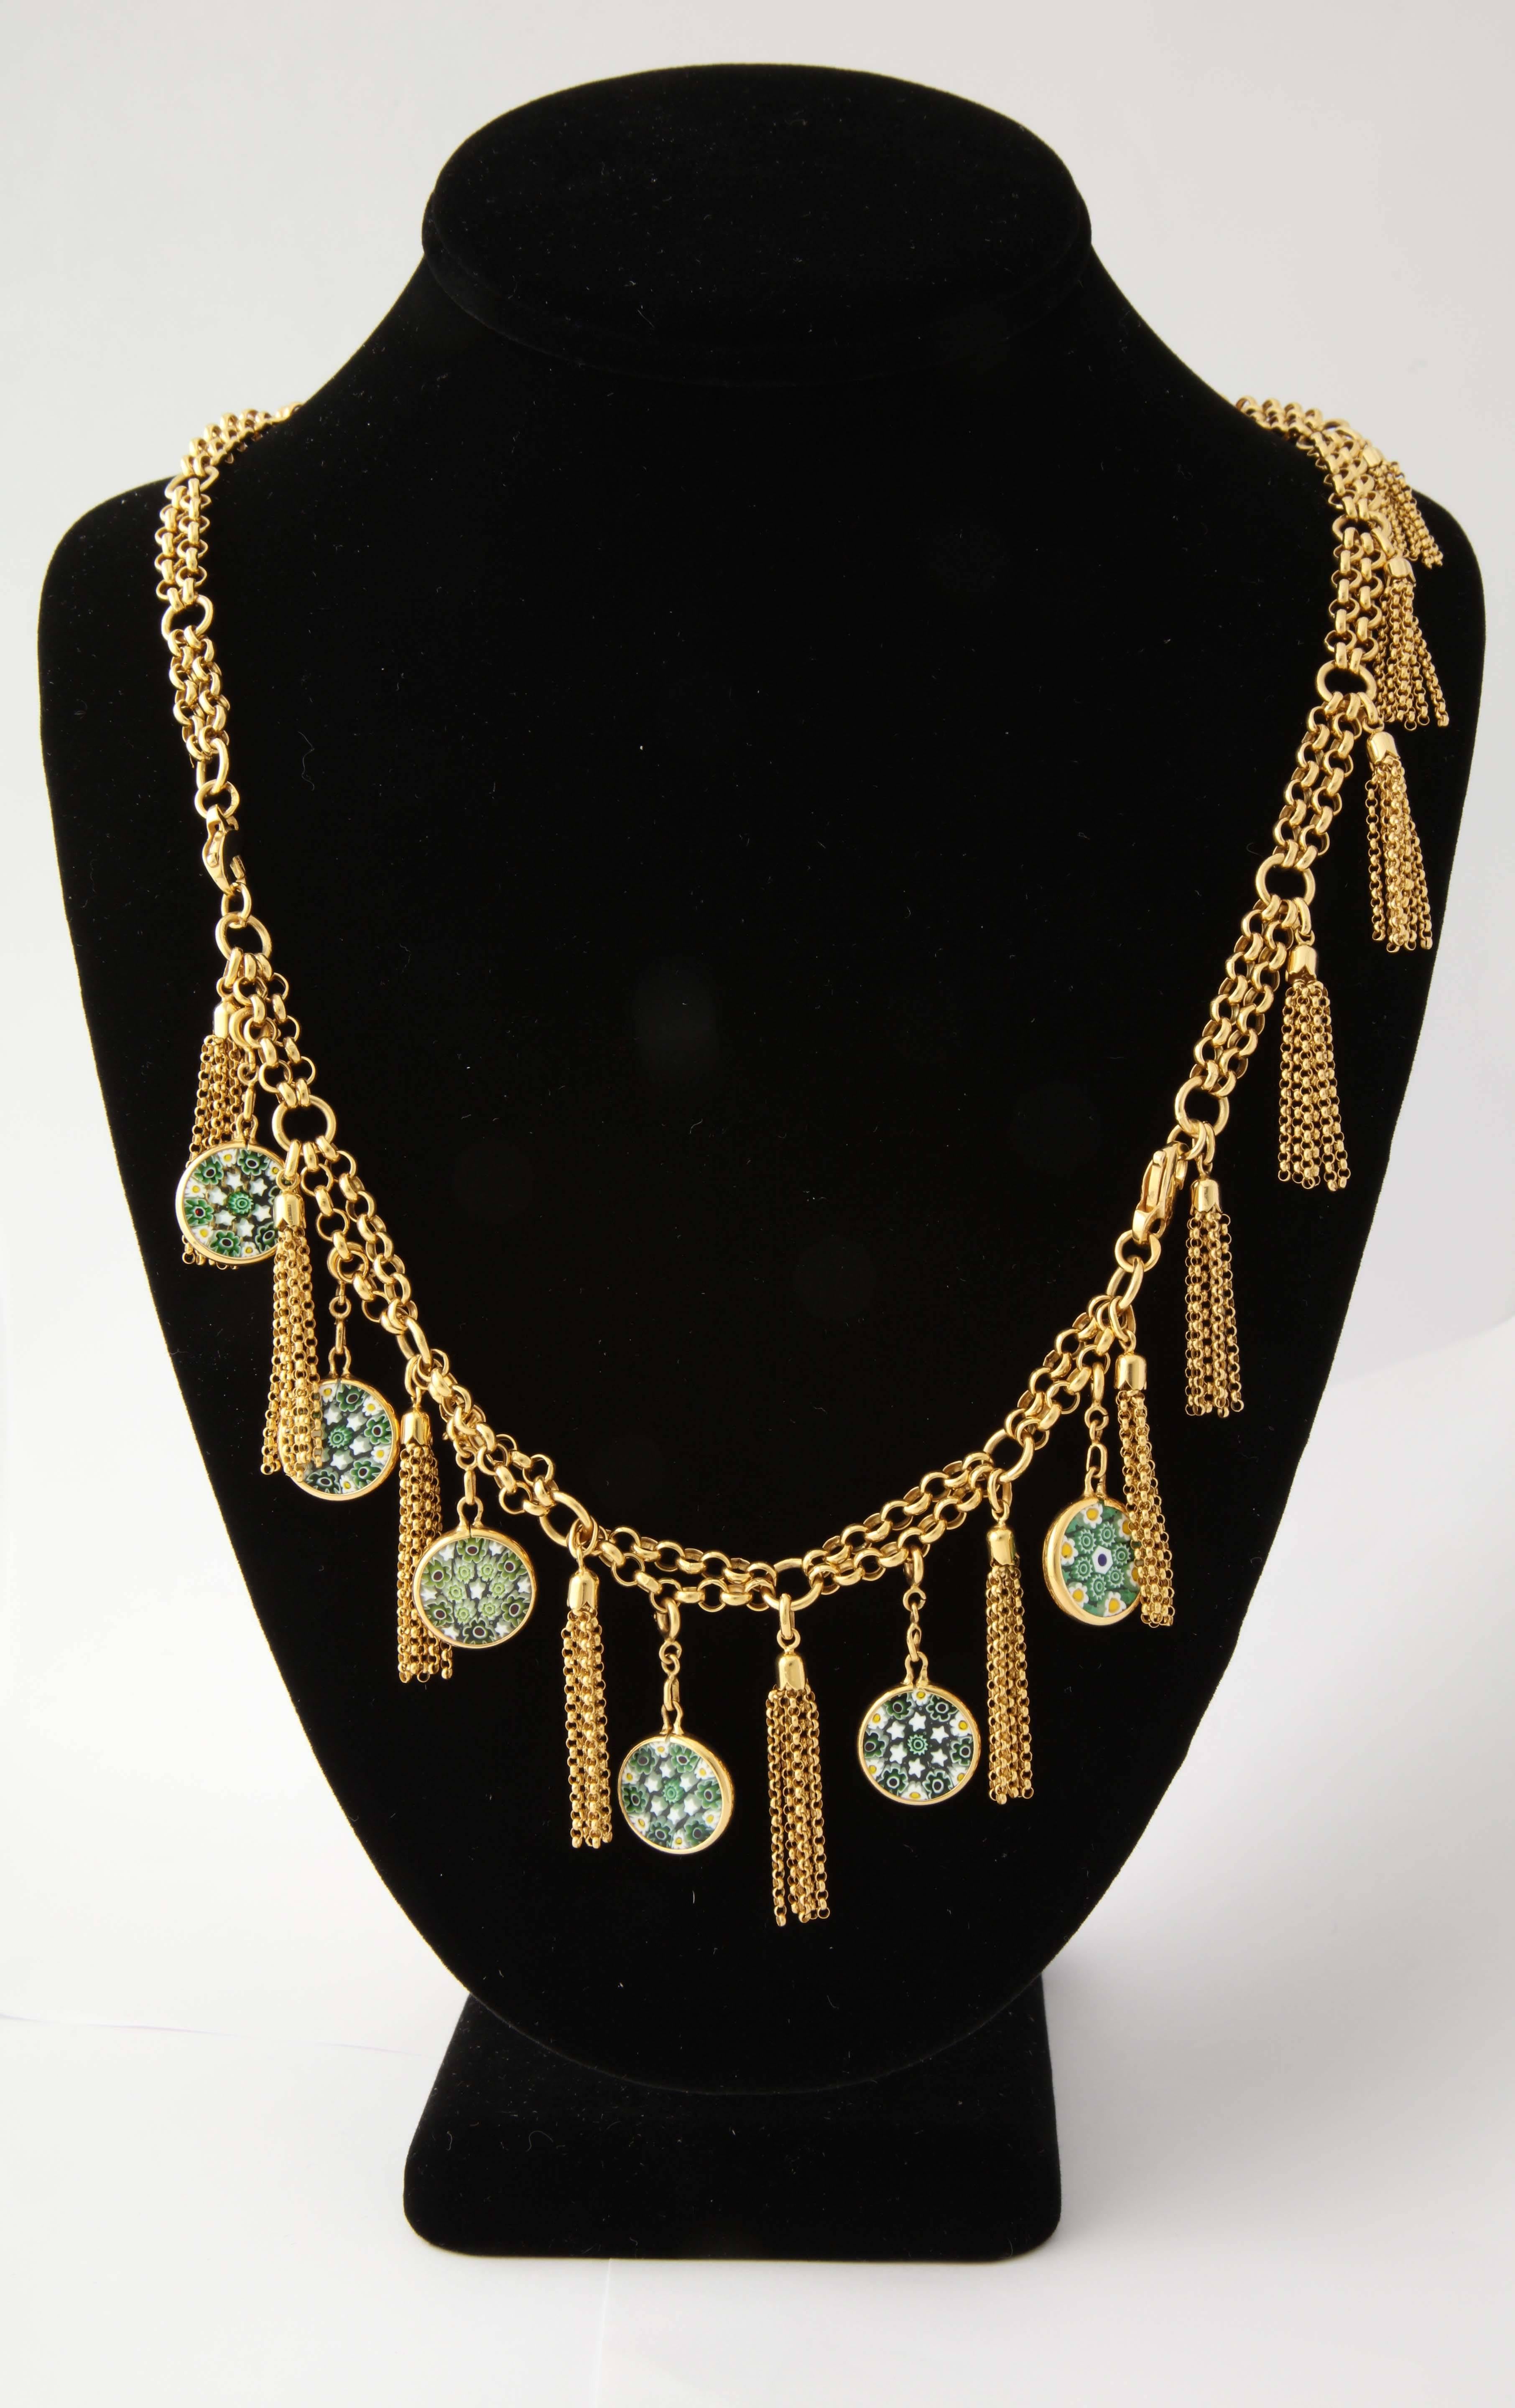 14kt Yellow Gold  Open Link Necklace With Bracelet Combination Suite Designed With Alternating 14kt Yellow Gold Tassel Pieces And With Alternating Green & White Daisy With Stars Murano Glass Circular Pendants. May Be Worn As One Long Necklace